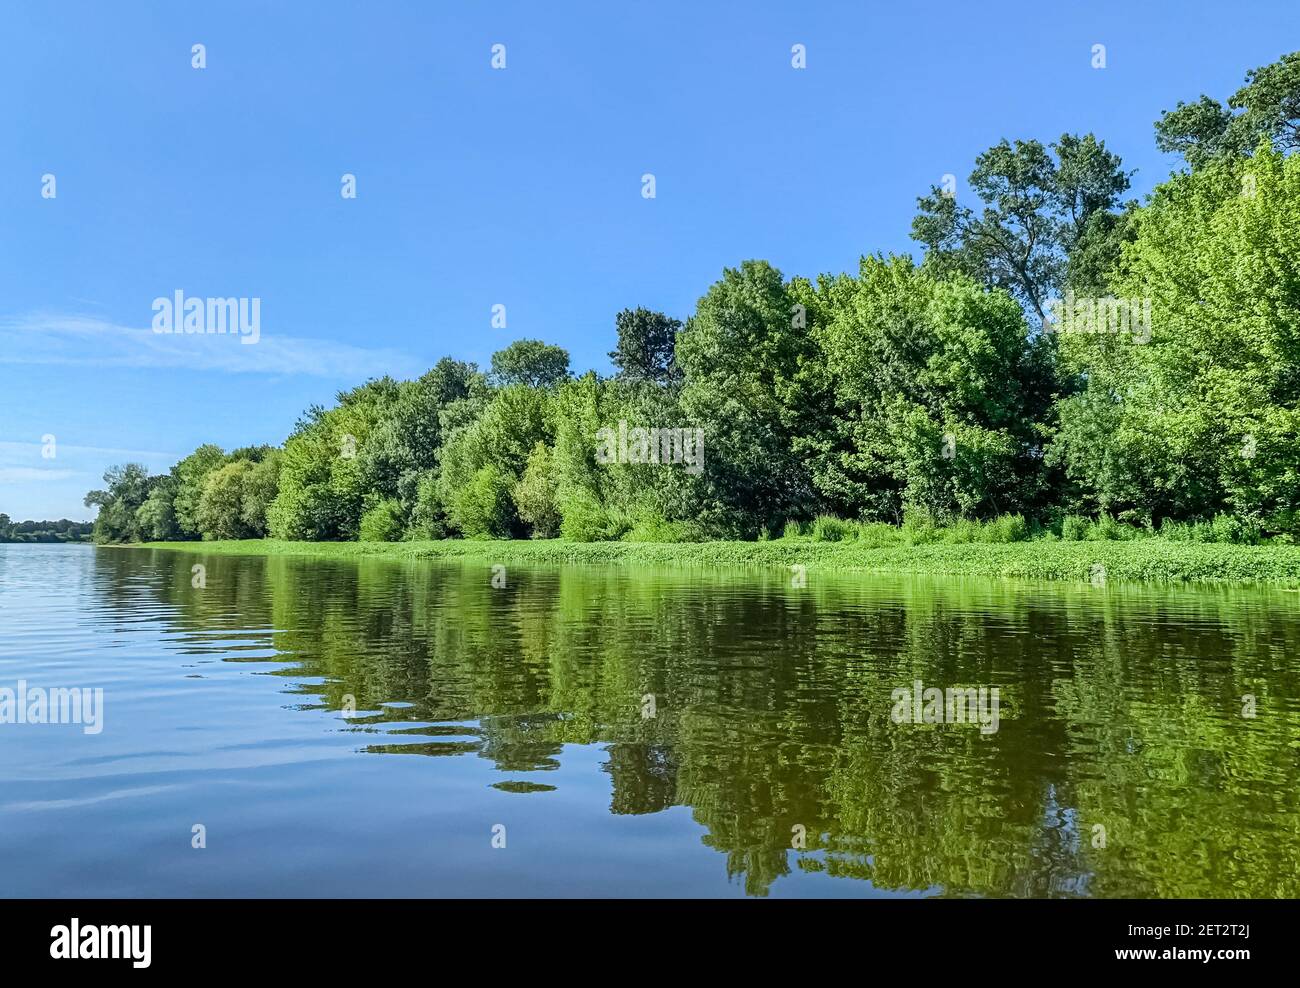 Surface view of the Loire River with lush vegetation reflecting on the water Stock Photo